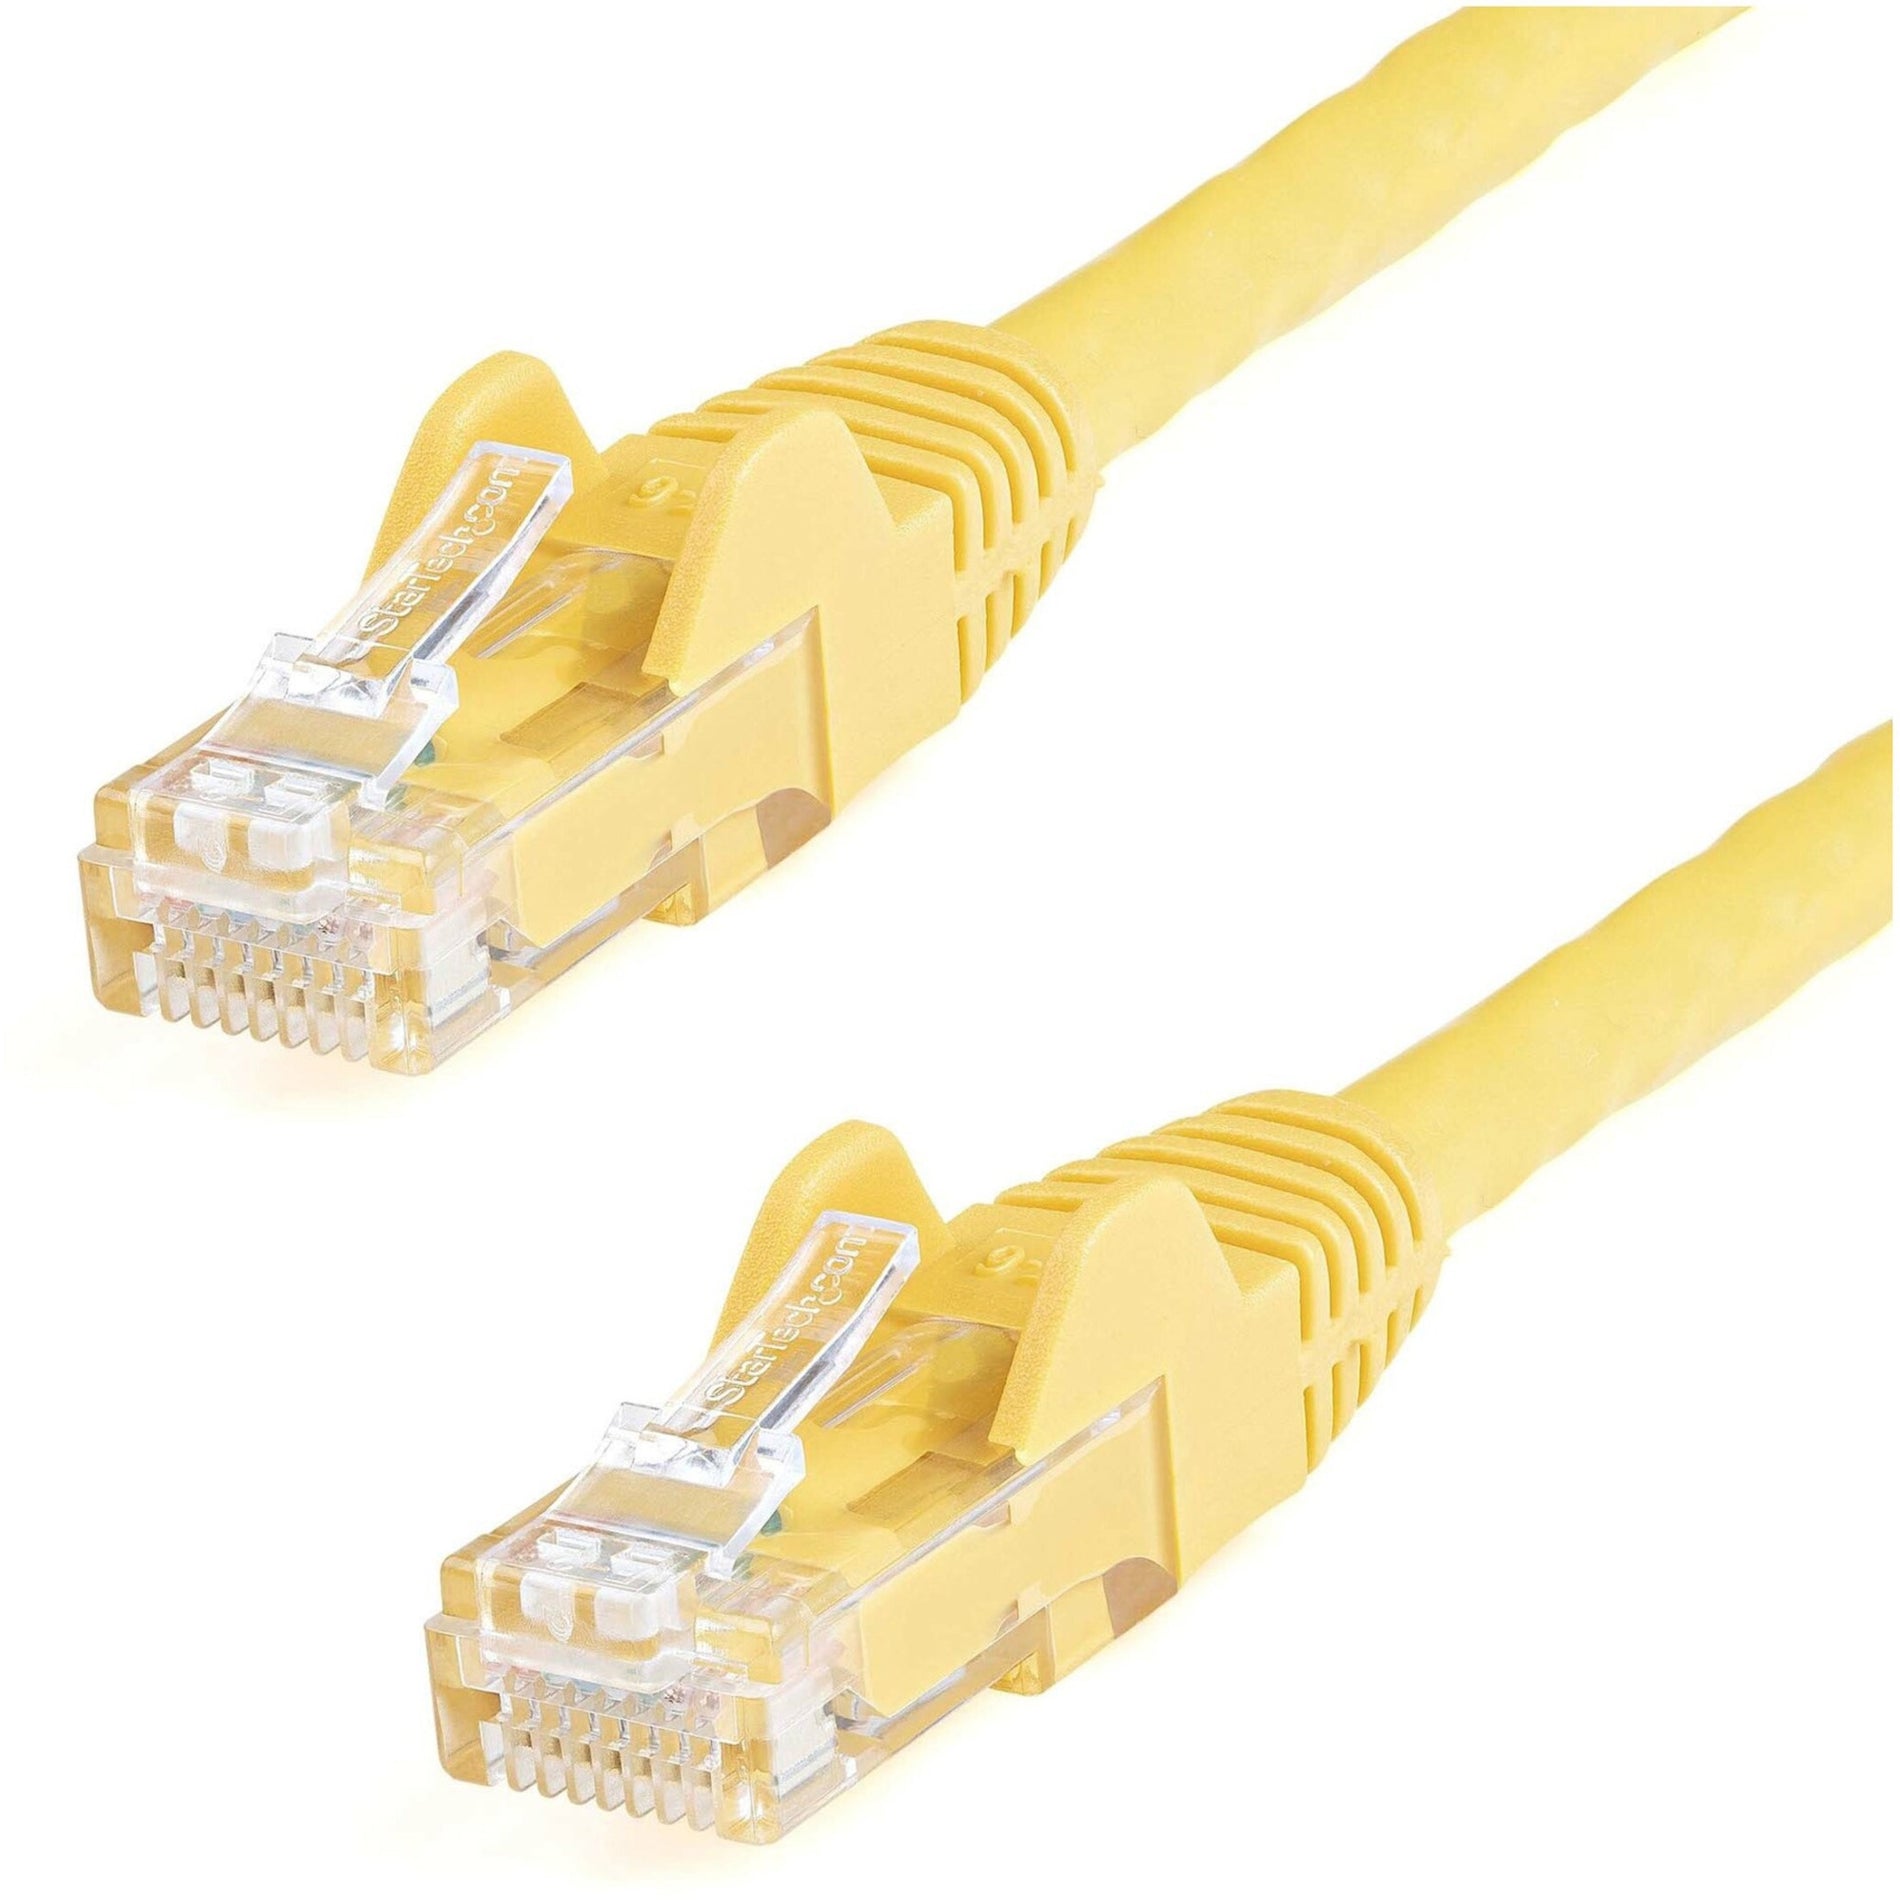 StarTech.com N6PATCH35YL 35 ft Yellow Snagless Cat6 UTP Patch Cable, Lifetime Warranty, 10 Gbit/s Data Transfer Rate, Gold Connectors